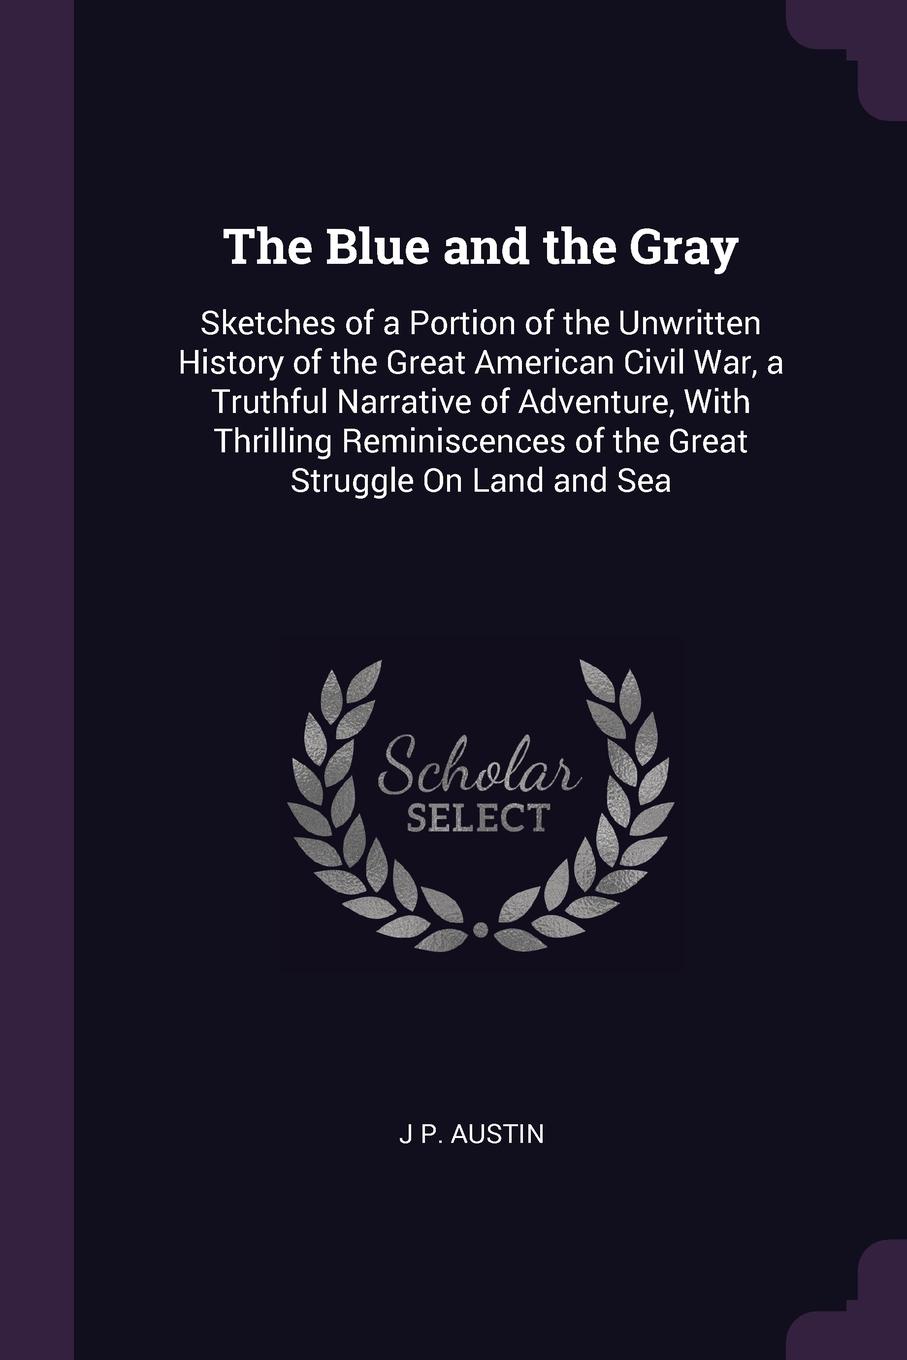 The Blue and the Gray. Sketches of a Portion of the Unwritten History of the Great American Civil War, a Truthful Narrative of Adventure, With Thrilling Reminiscences of the Great Struggle On Land and Sea